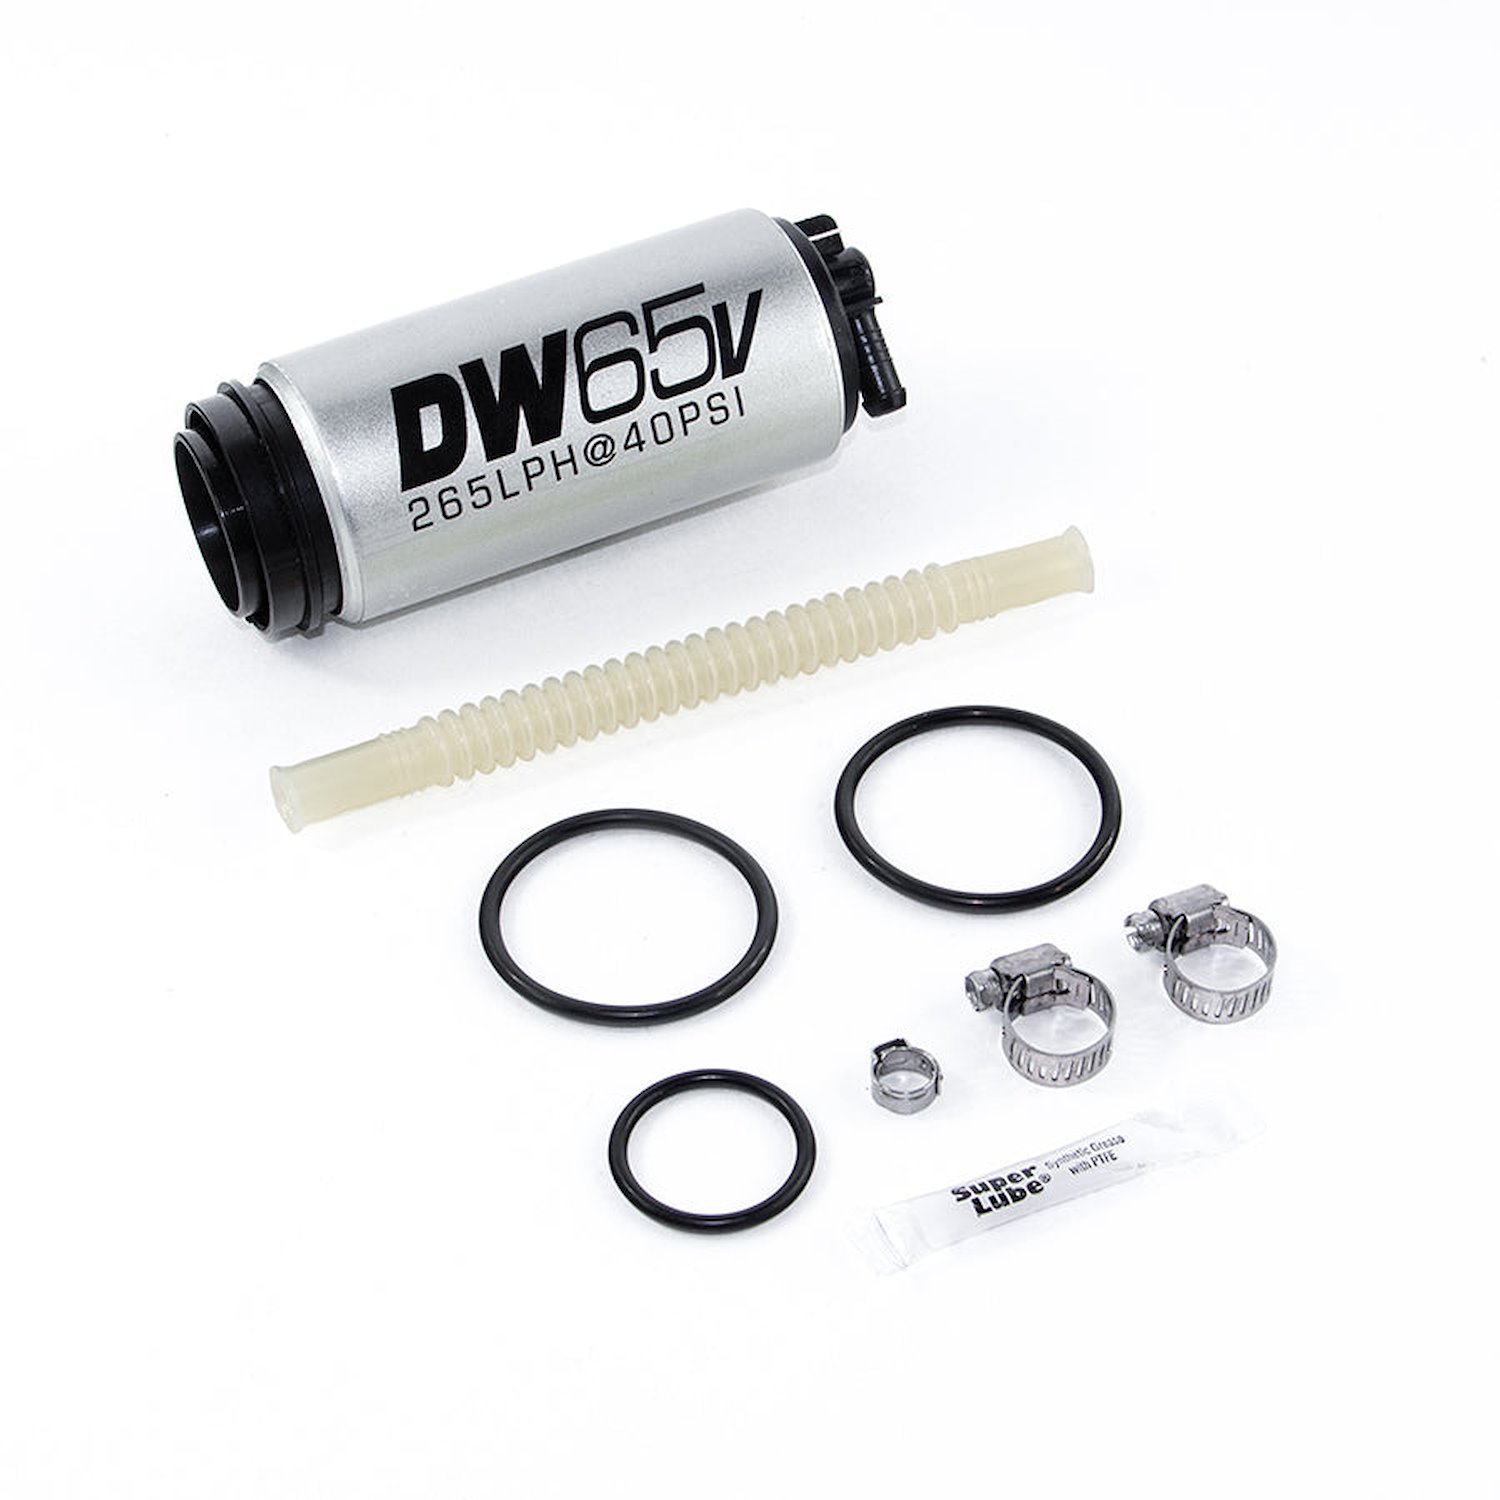 96541025 DW65v series 265lph in-tank fuel pump w/ install kit for VW and Audi 1.8t FWD